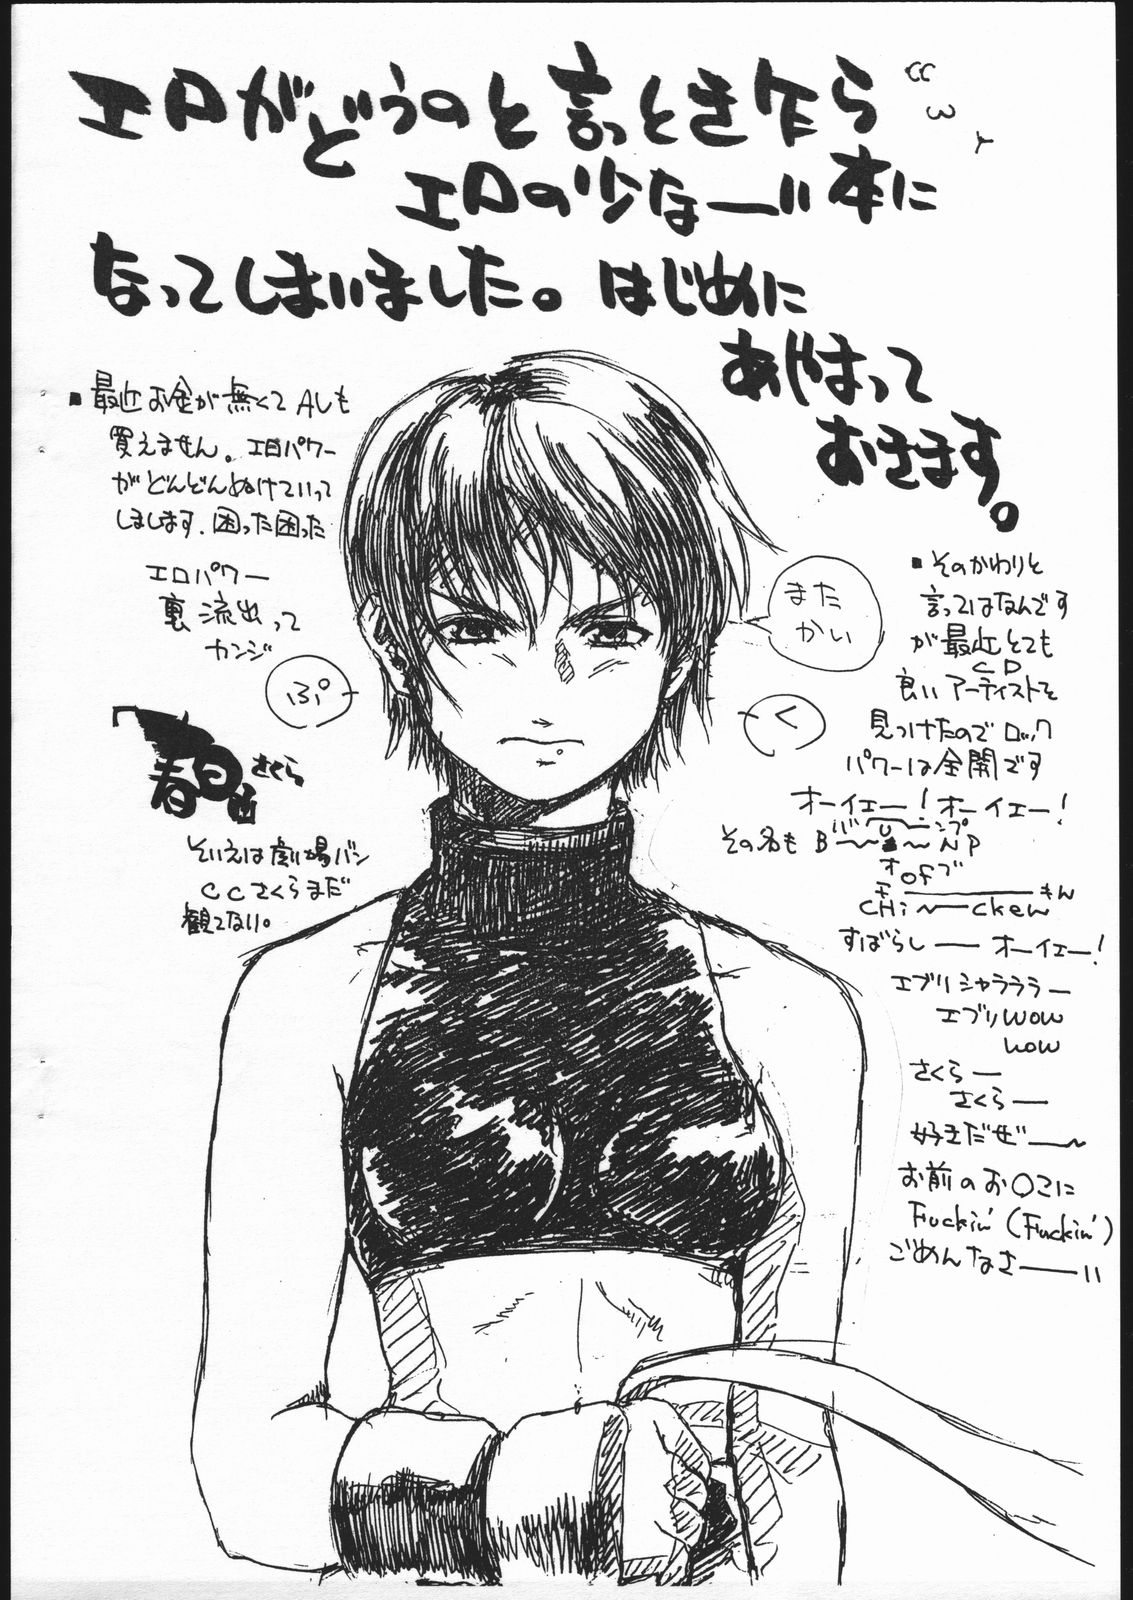 [kita ie (Kitamura Takashi)] FROM NOWHERE 3 (Rival Schools, Street Fighter) [北家] FROM NOWHERE 3